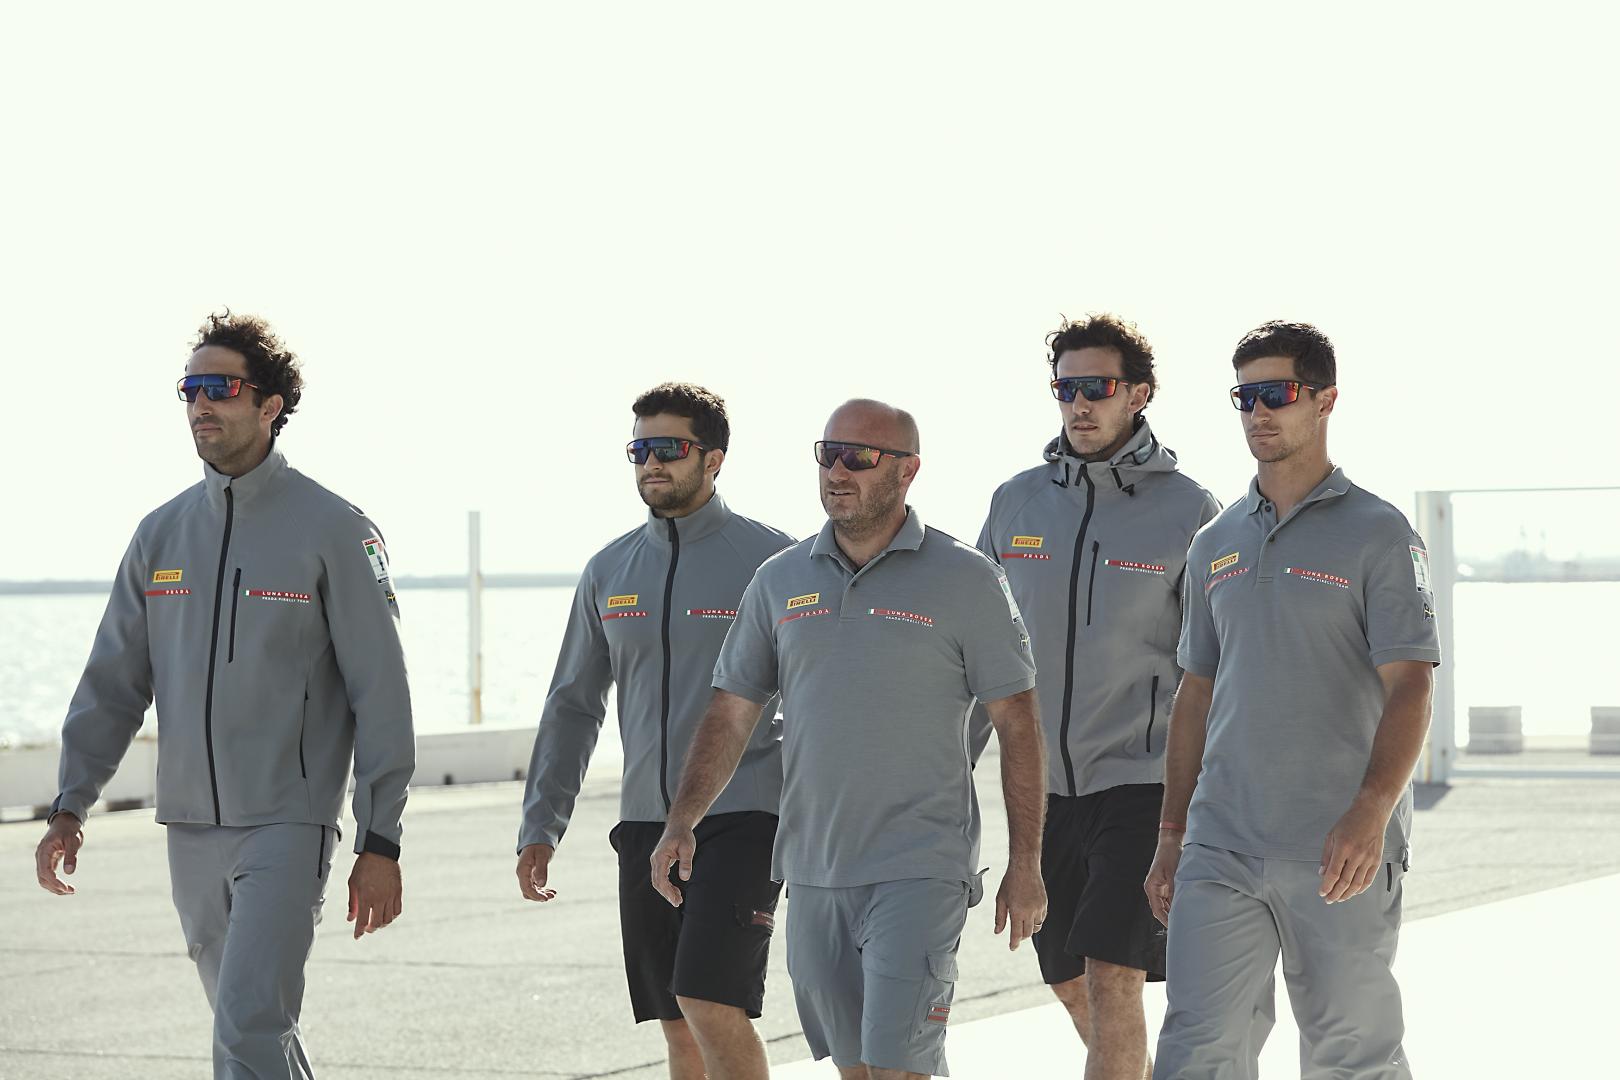 The Woolmark Company was today announced as the official technical partner of the America’s Cup team Luna Rossa Prada Pirelli